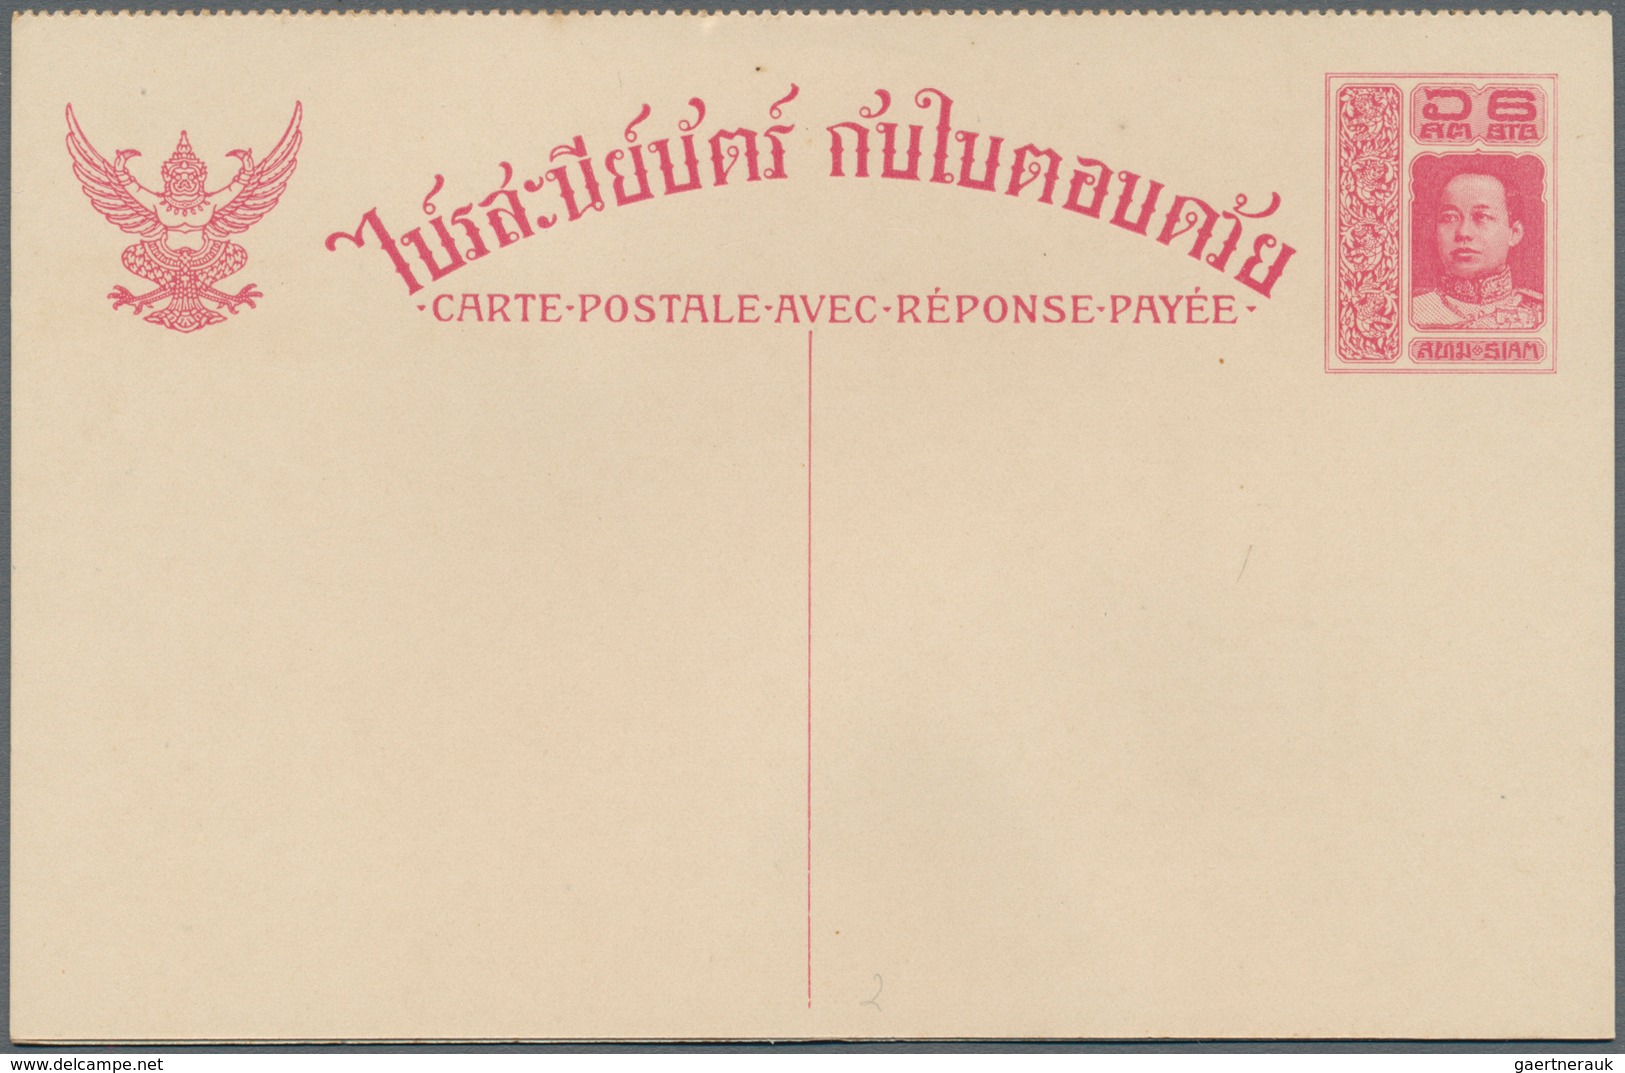 Thailand - Ganzsachen: 1913 Postal Stationery Double Card 6+6 Stg Deep Rose On White, Unused, With F - Thailand